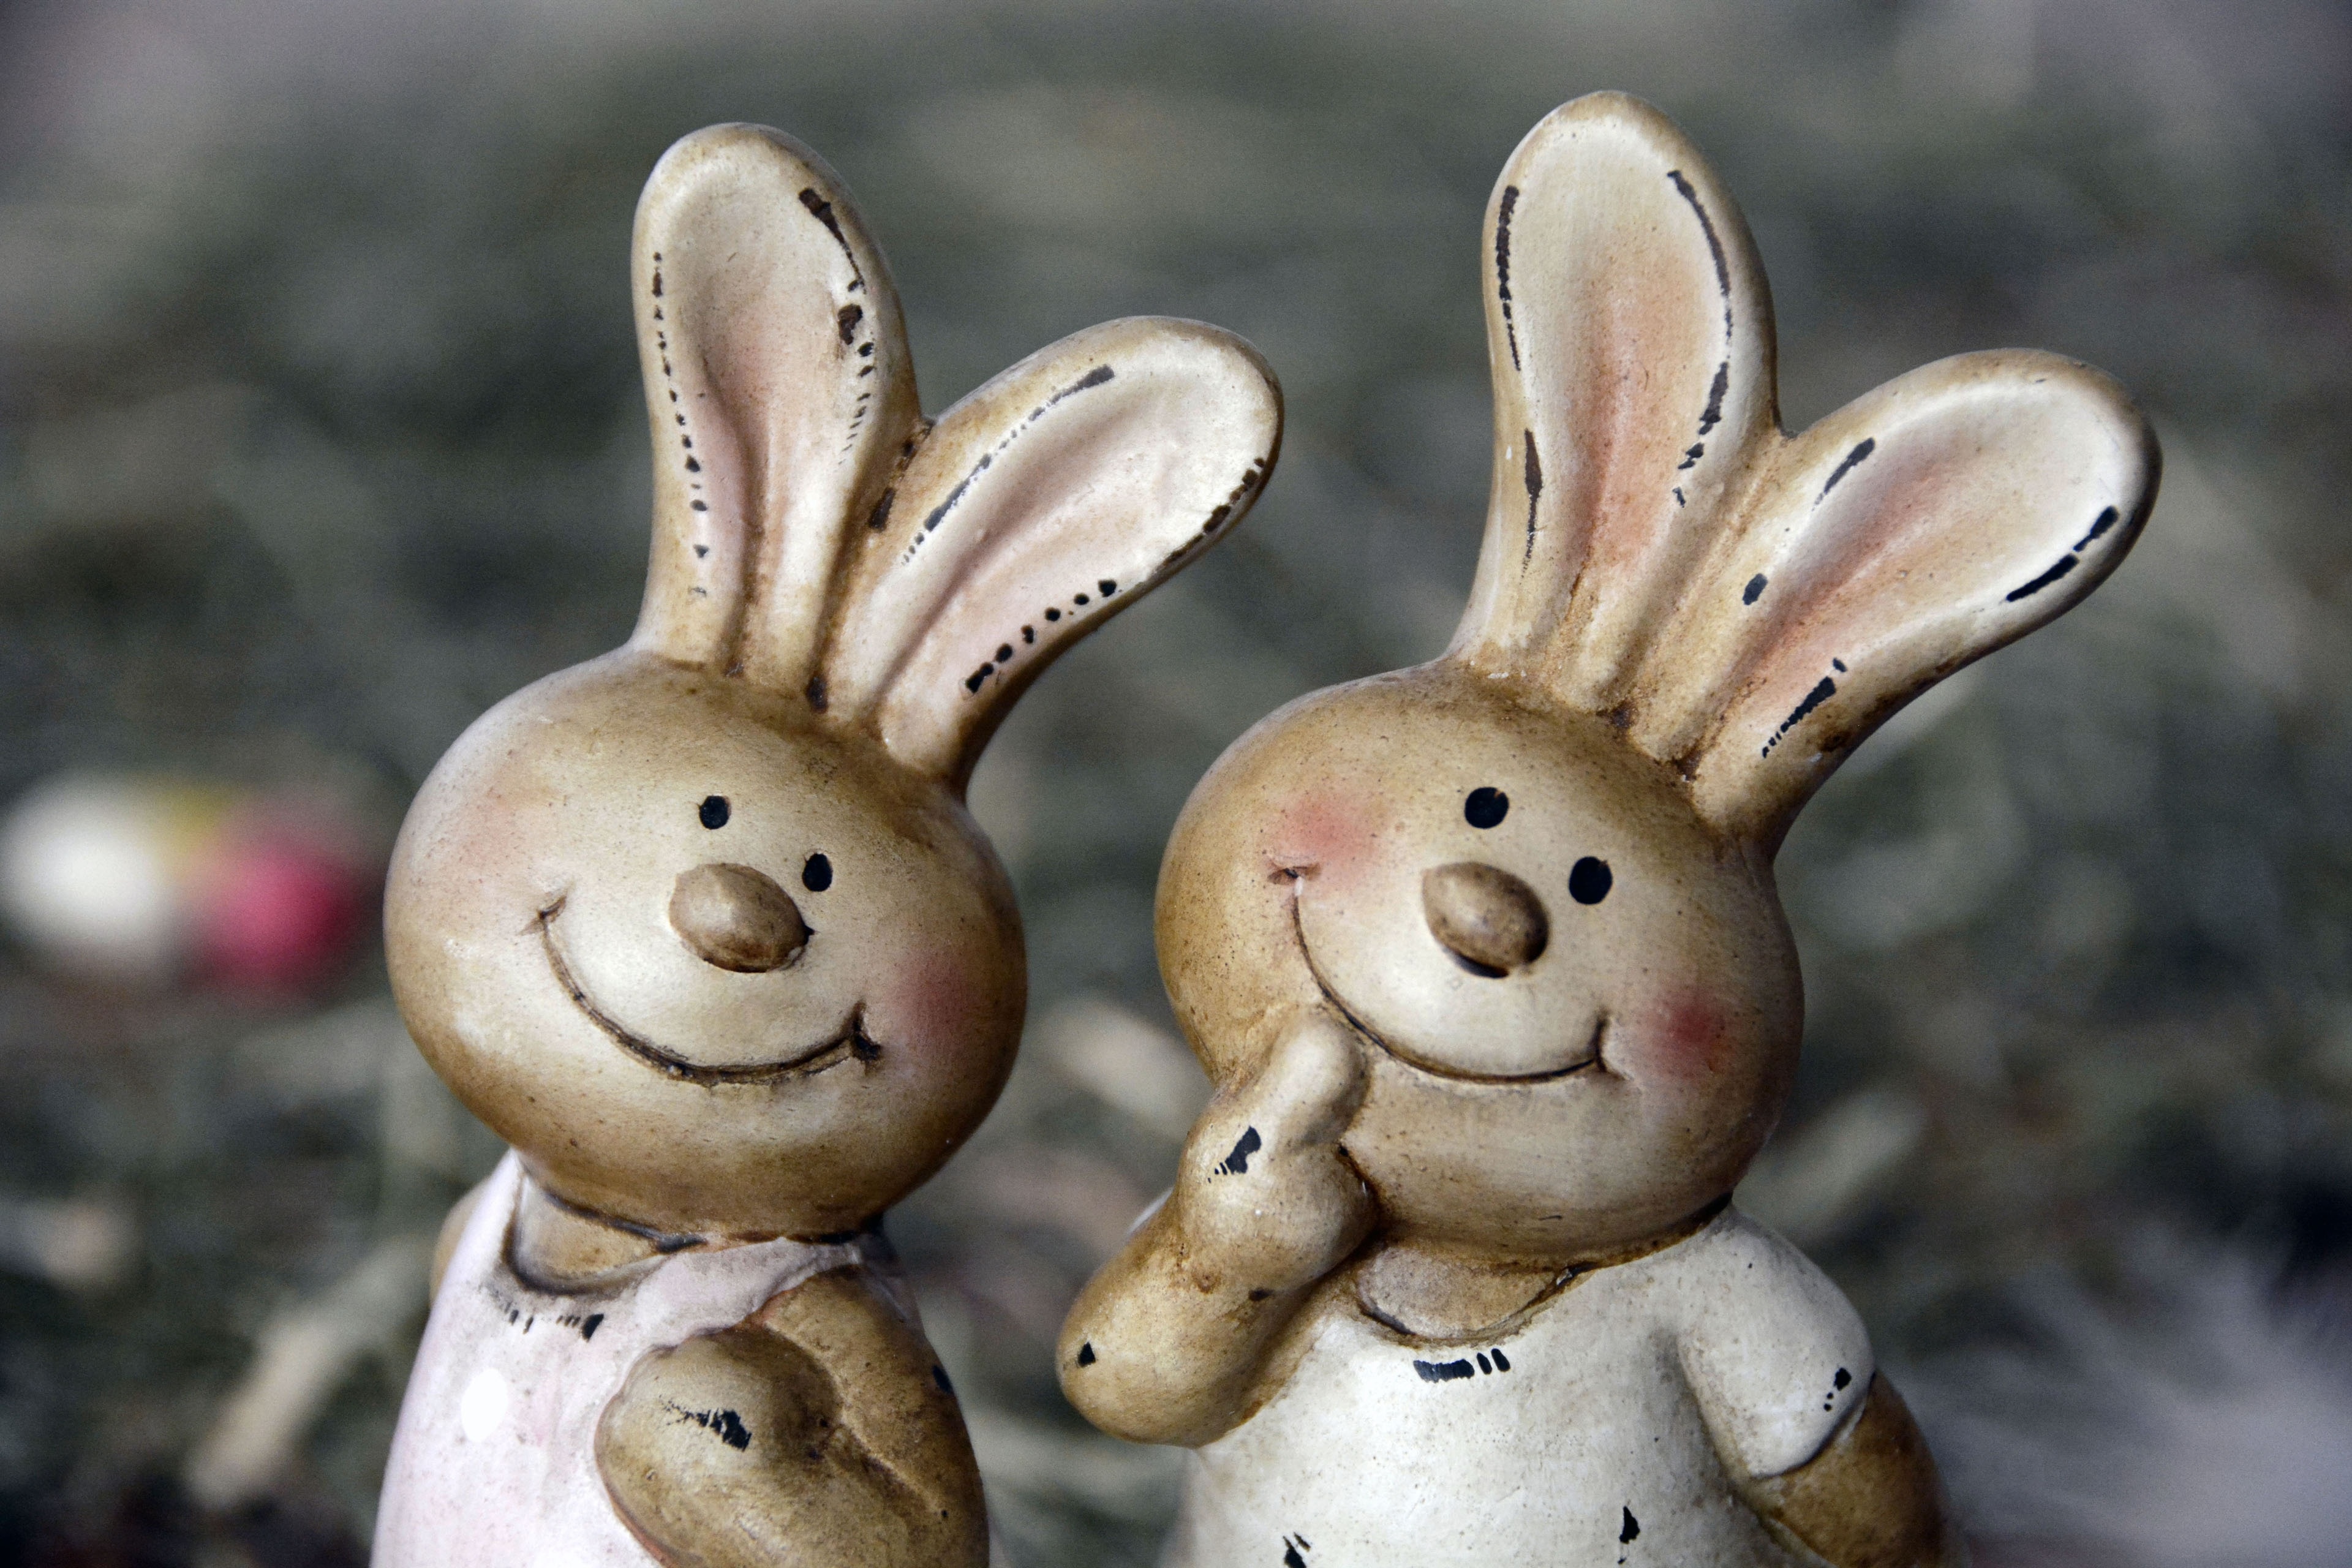 2 brown and white smiling bunny figurine